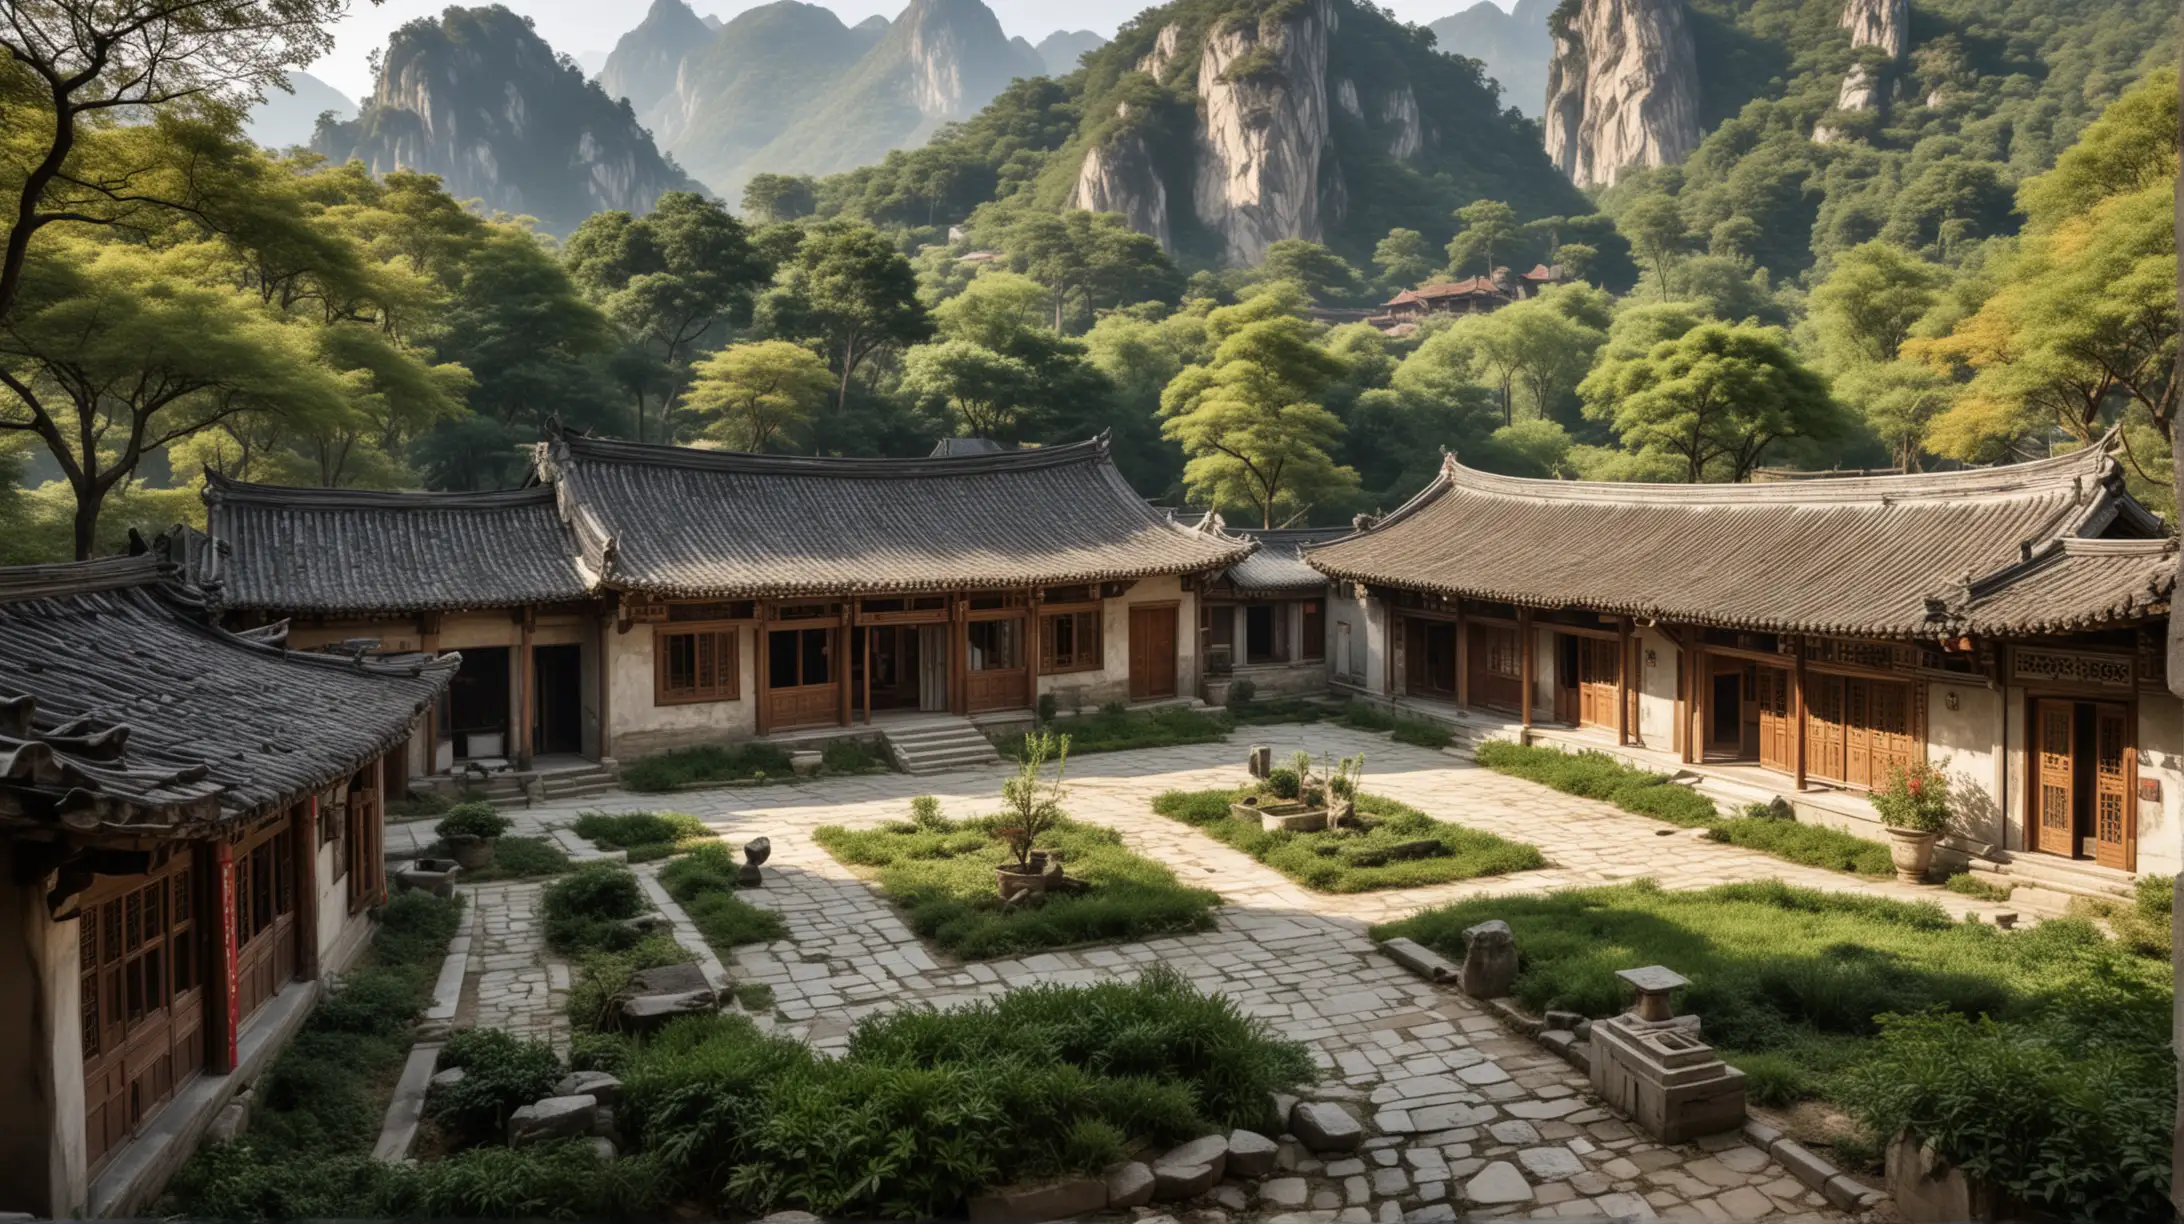 Tranquil Ancient Chinese Countryside Farmhouse Amidst Forest and Mountains